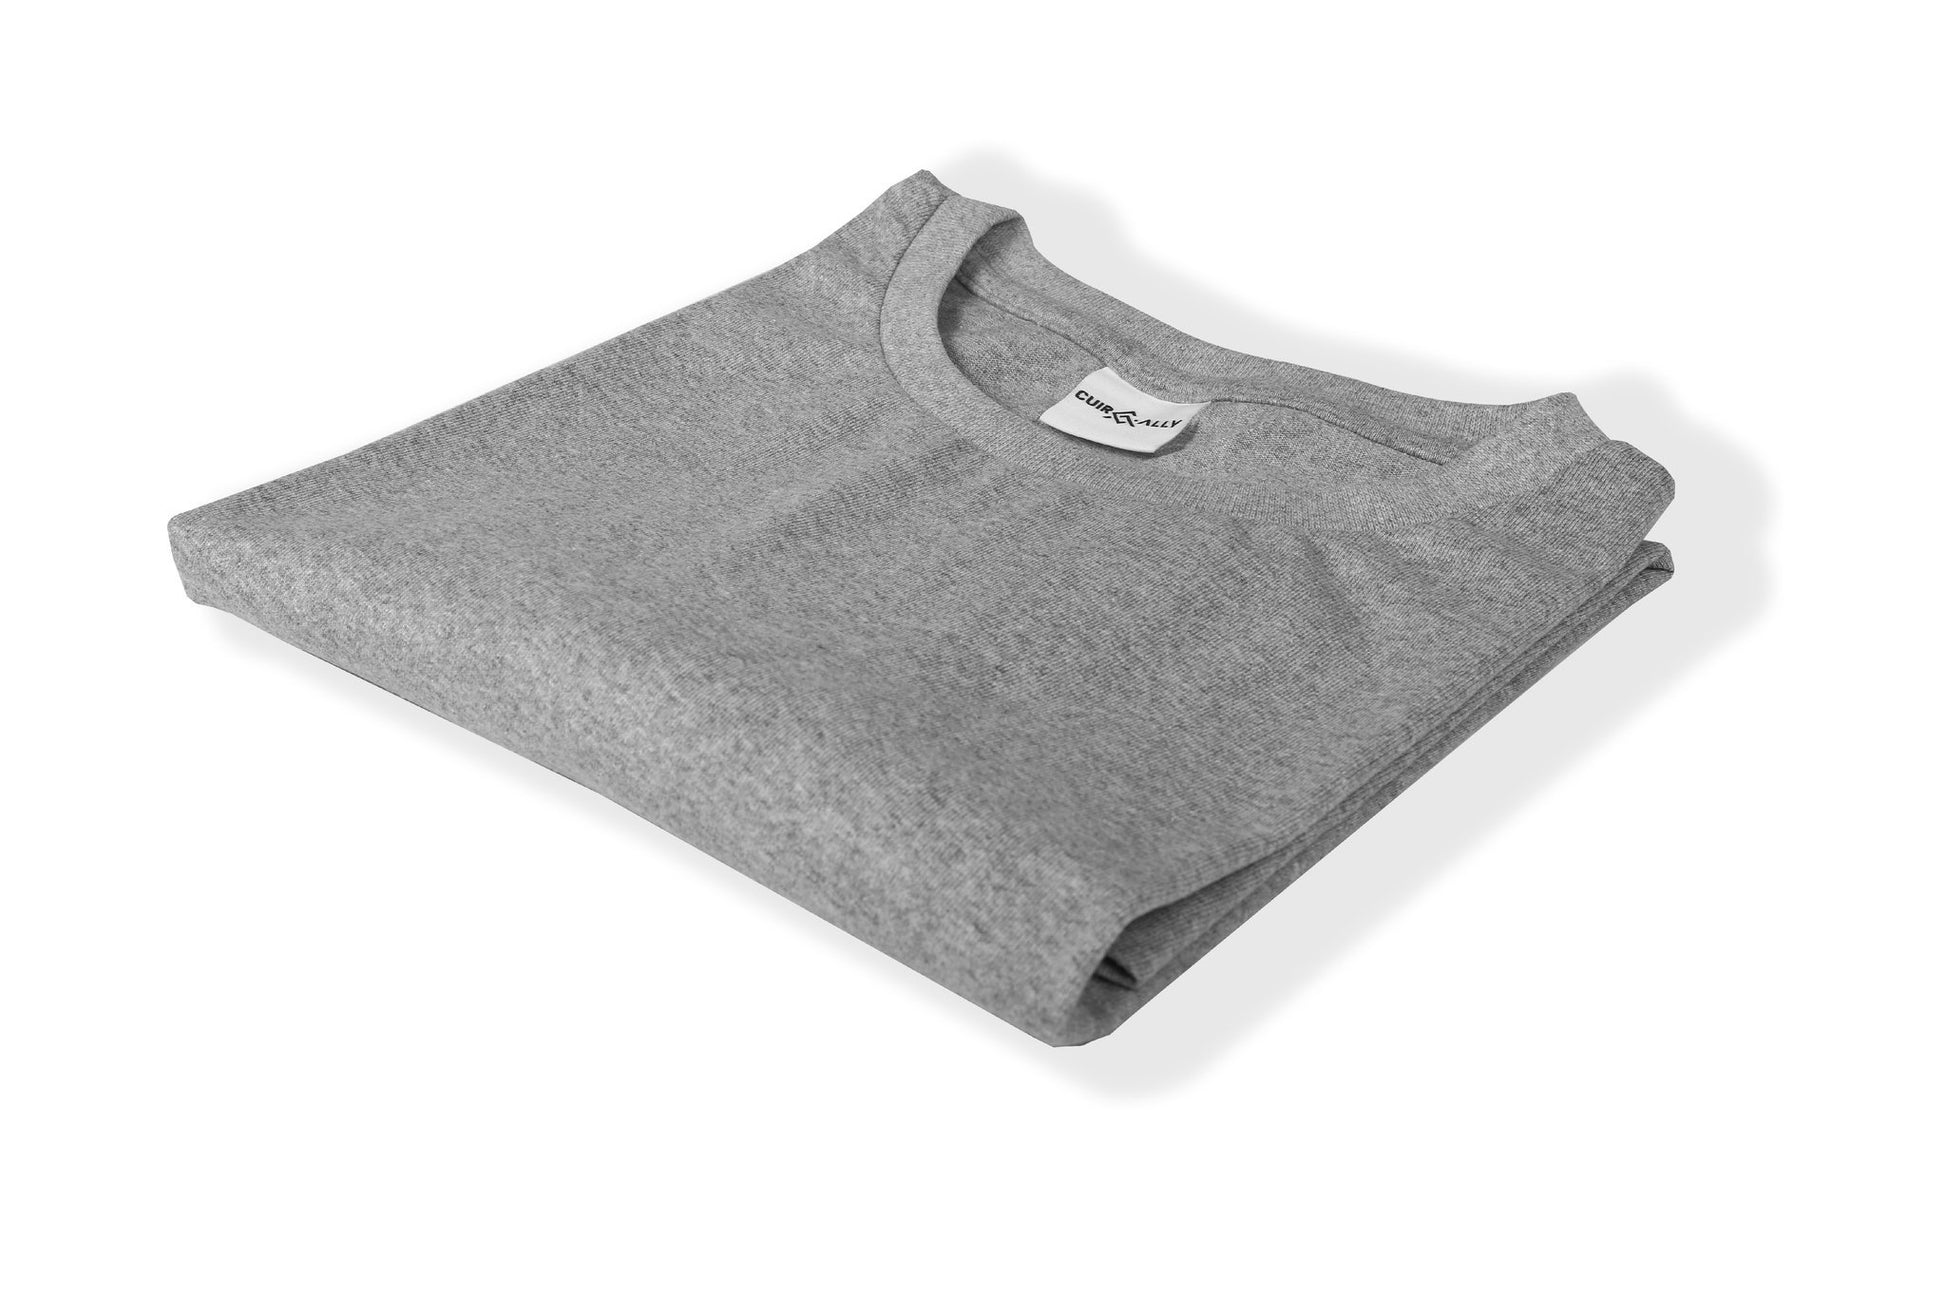 Recyclo T-Shirt (Made from Cotton + Recycled Plastic Bottles) - Cuir Ally Smart Goods